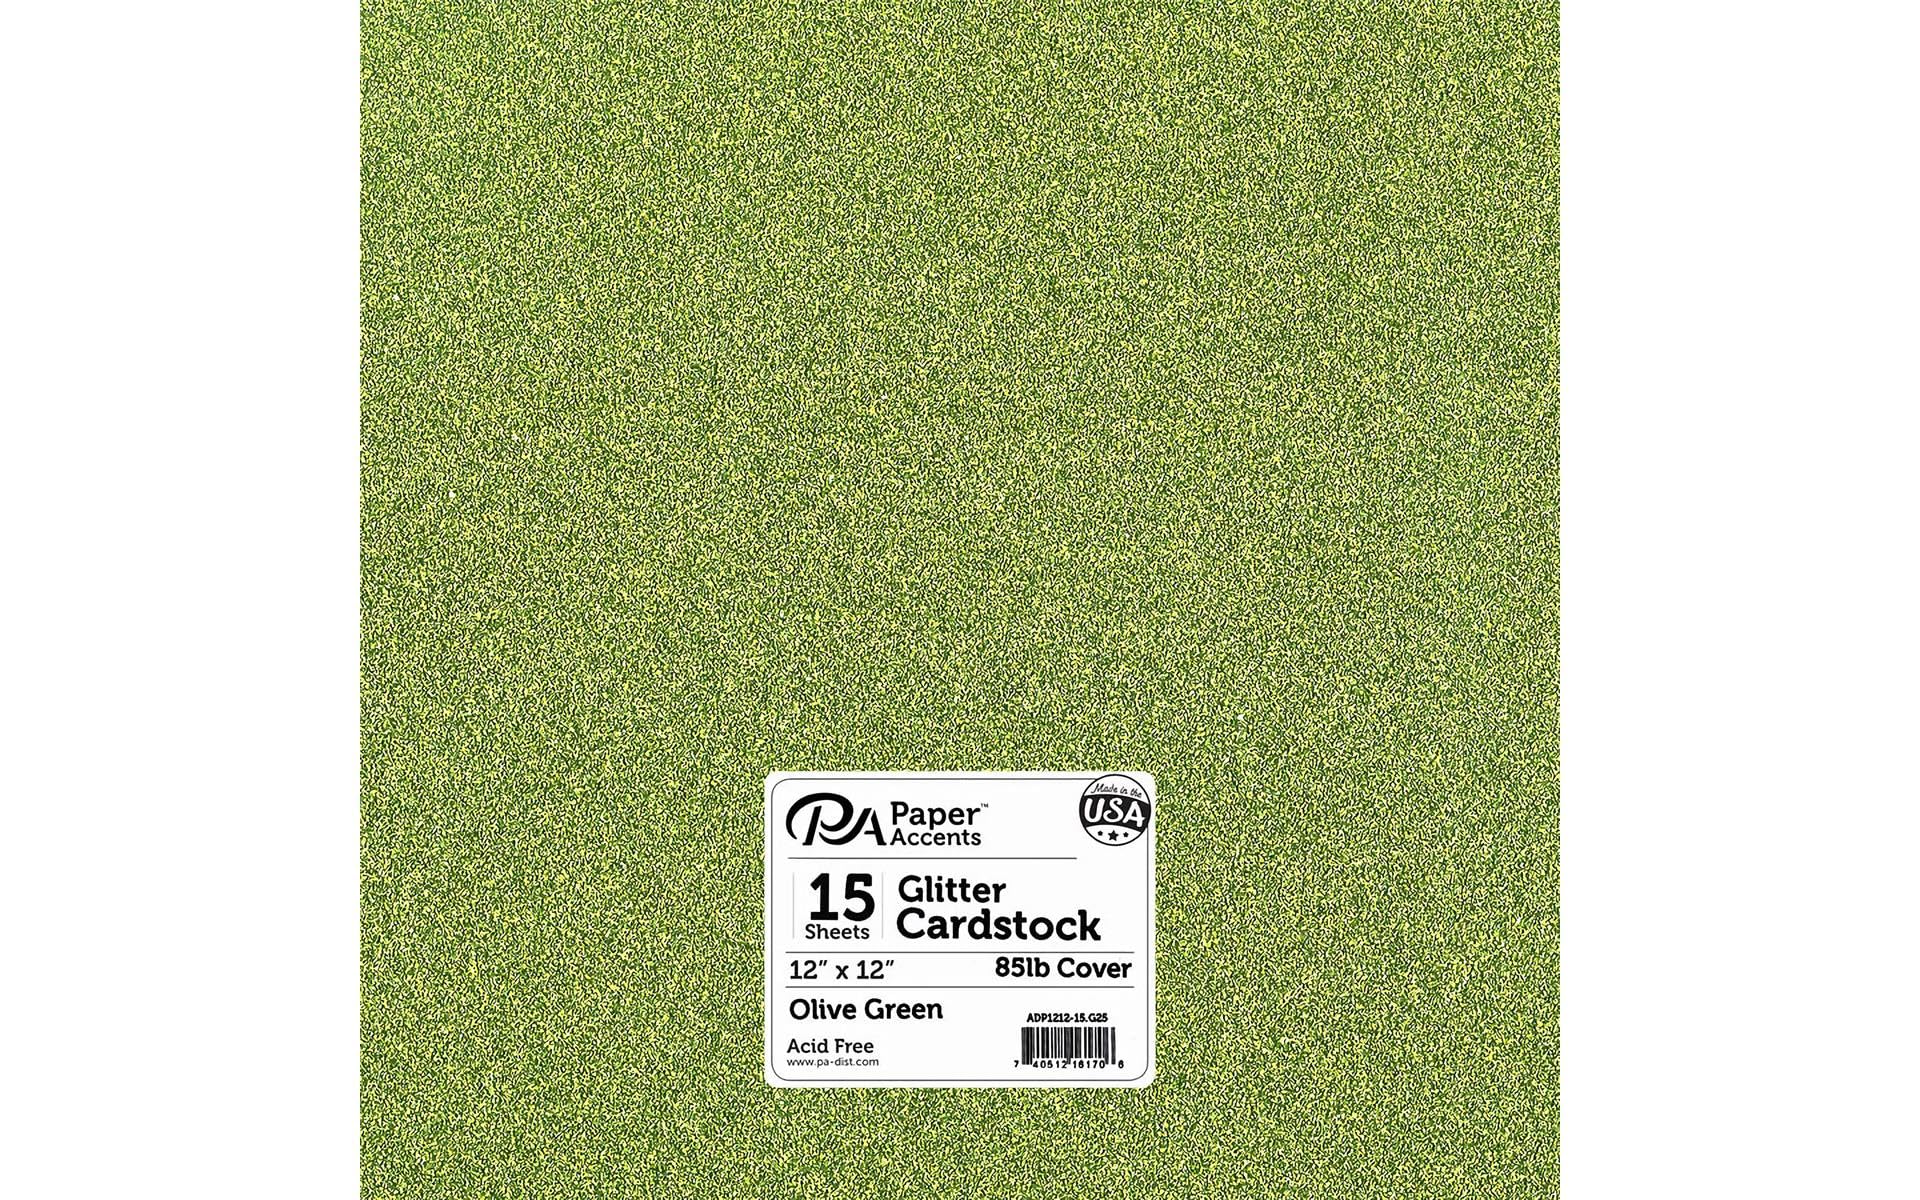 PA Paper Accents Glitter Cardstock 12" x 12" Olive Green, 85lb colored cardstock paper for card making, scrapbooking, printing, quilling and crafts, 15 piece pack